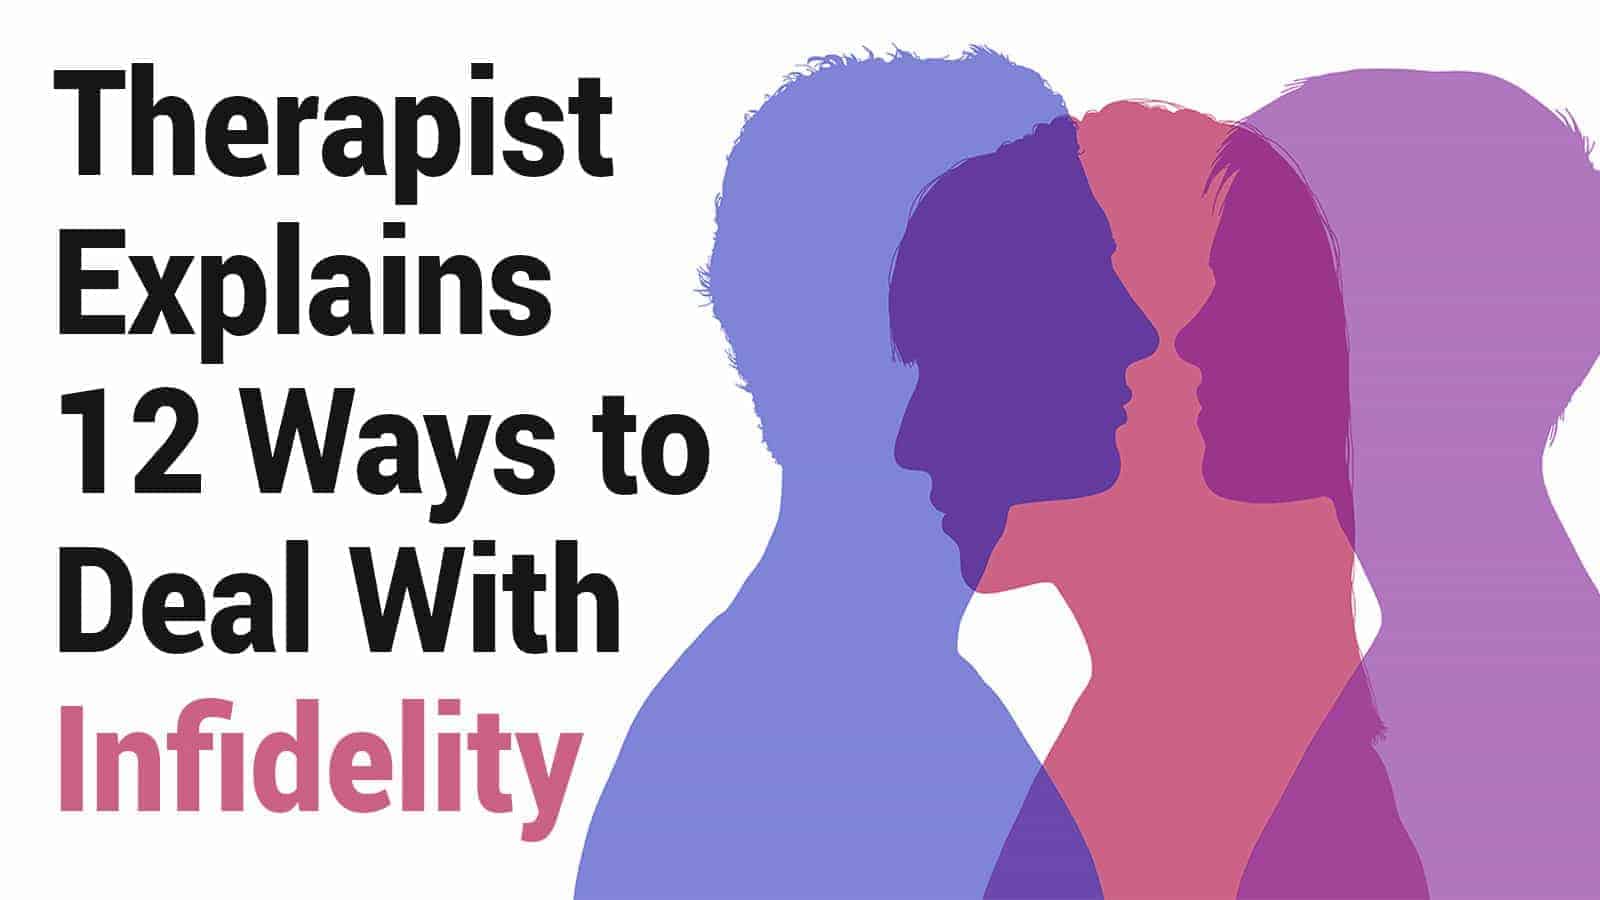 Therapist Explains 12 Ways to Deal With Infidelity